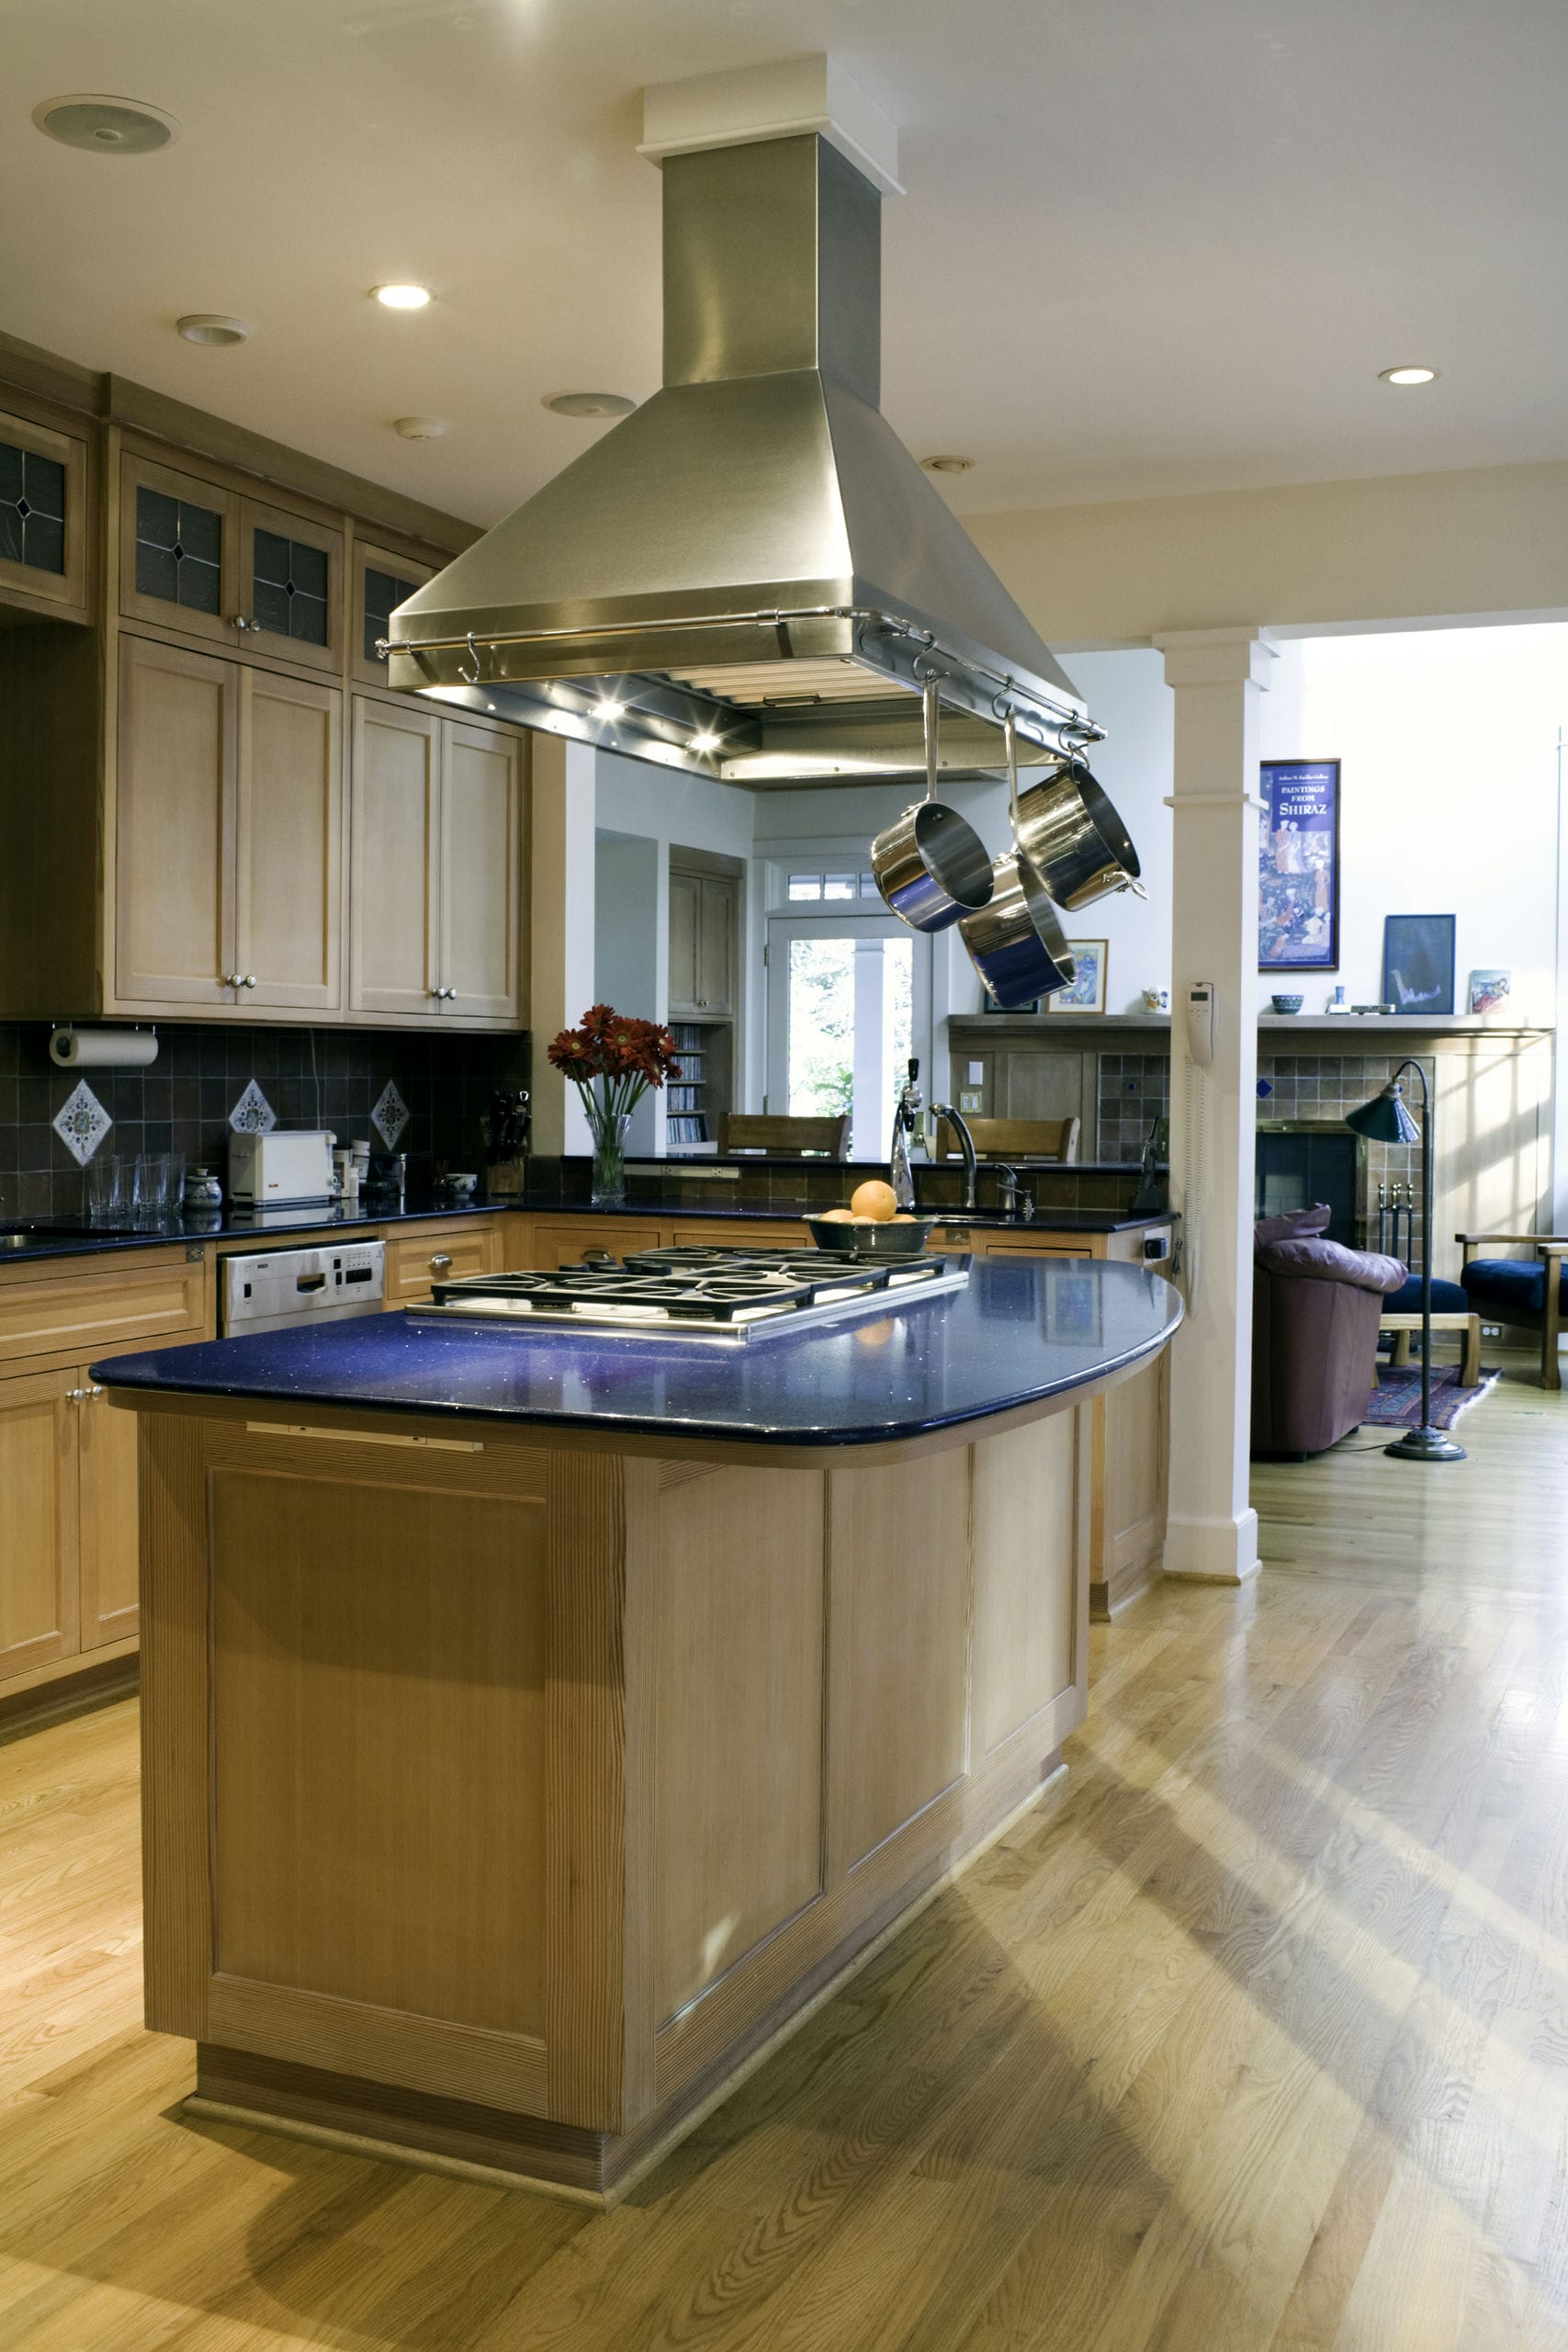 A kitchen with generous cooking island, metal range hood and natural wood cabinets opens up to the living space